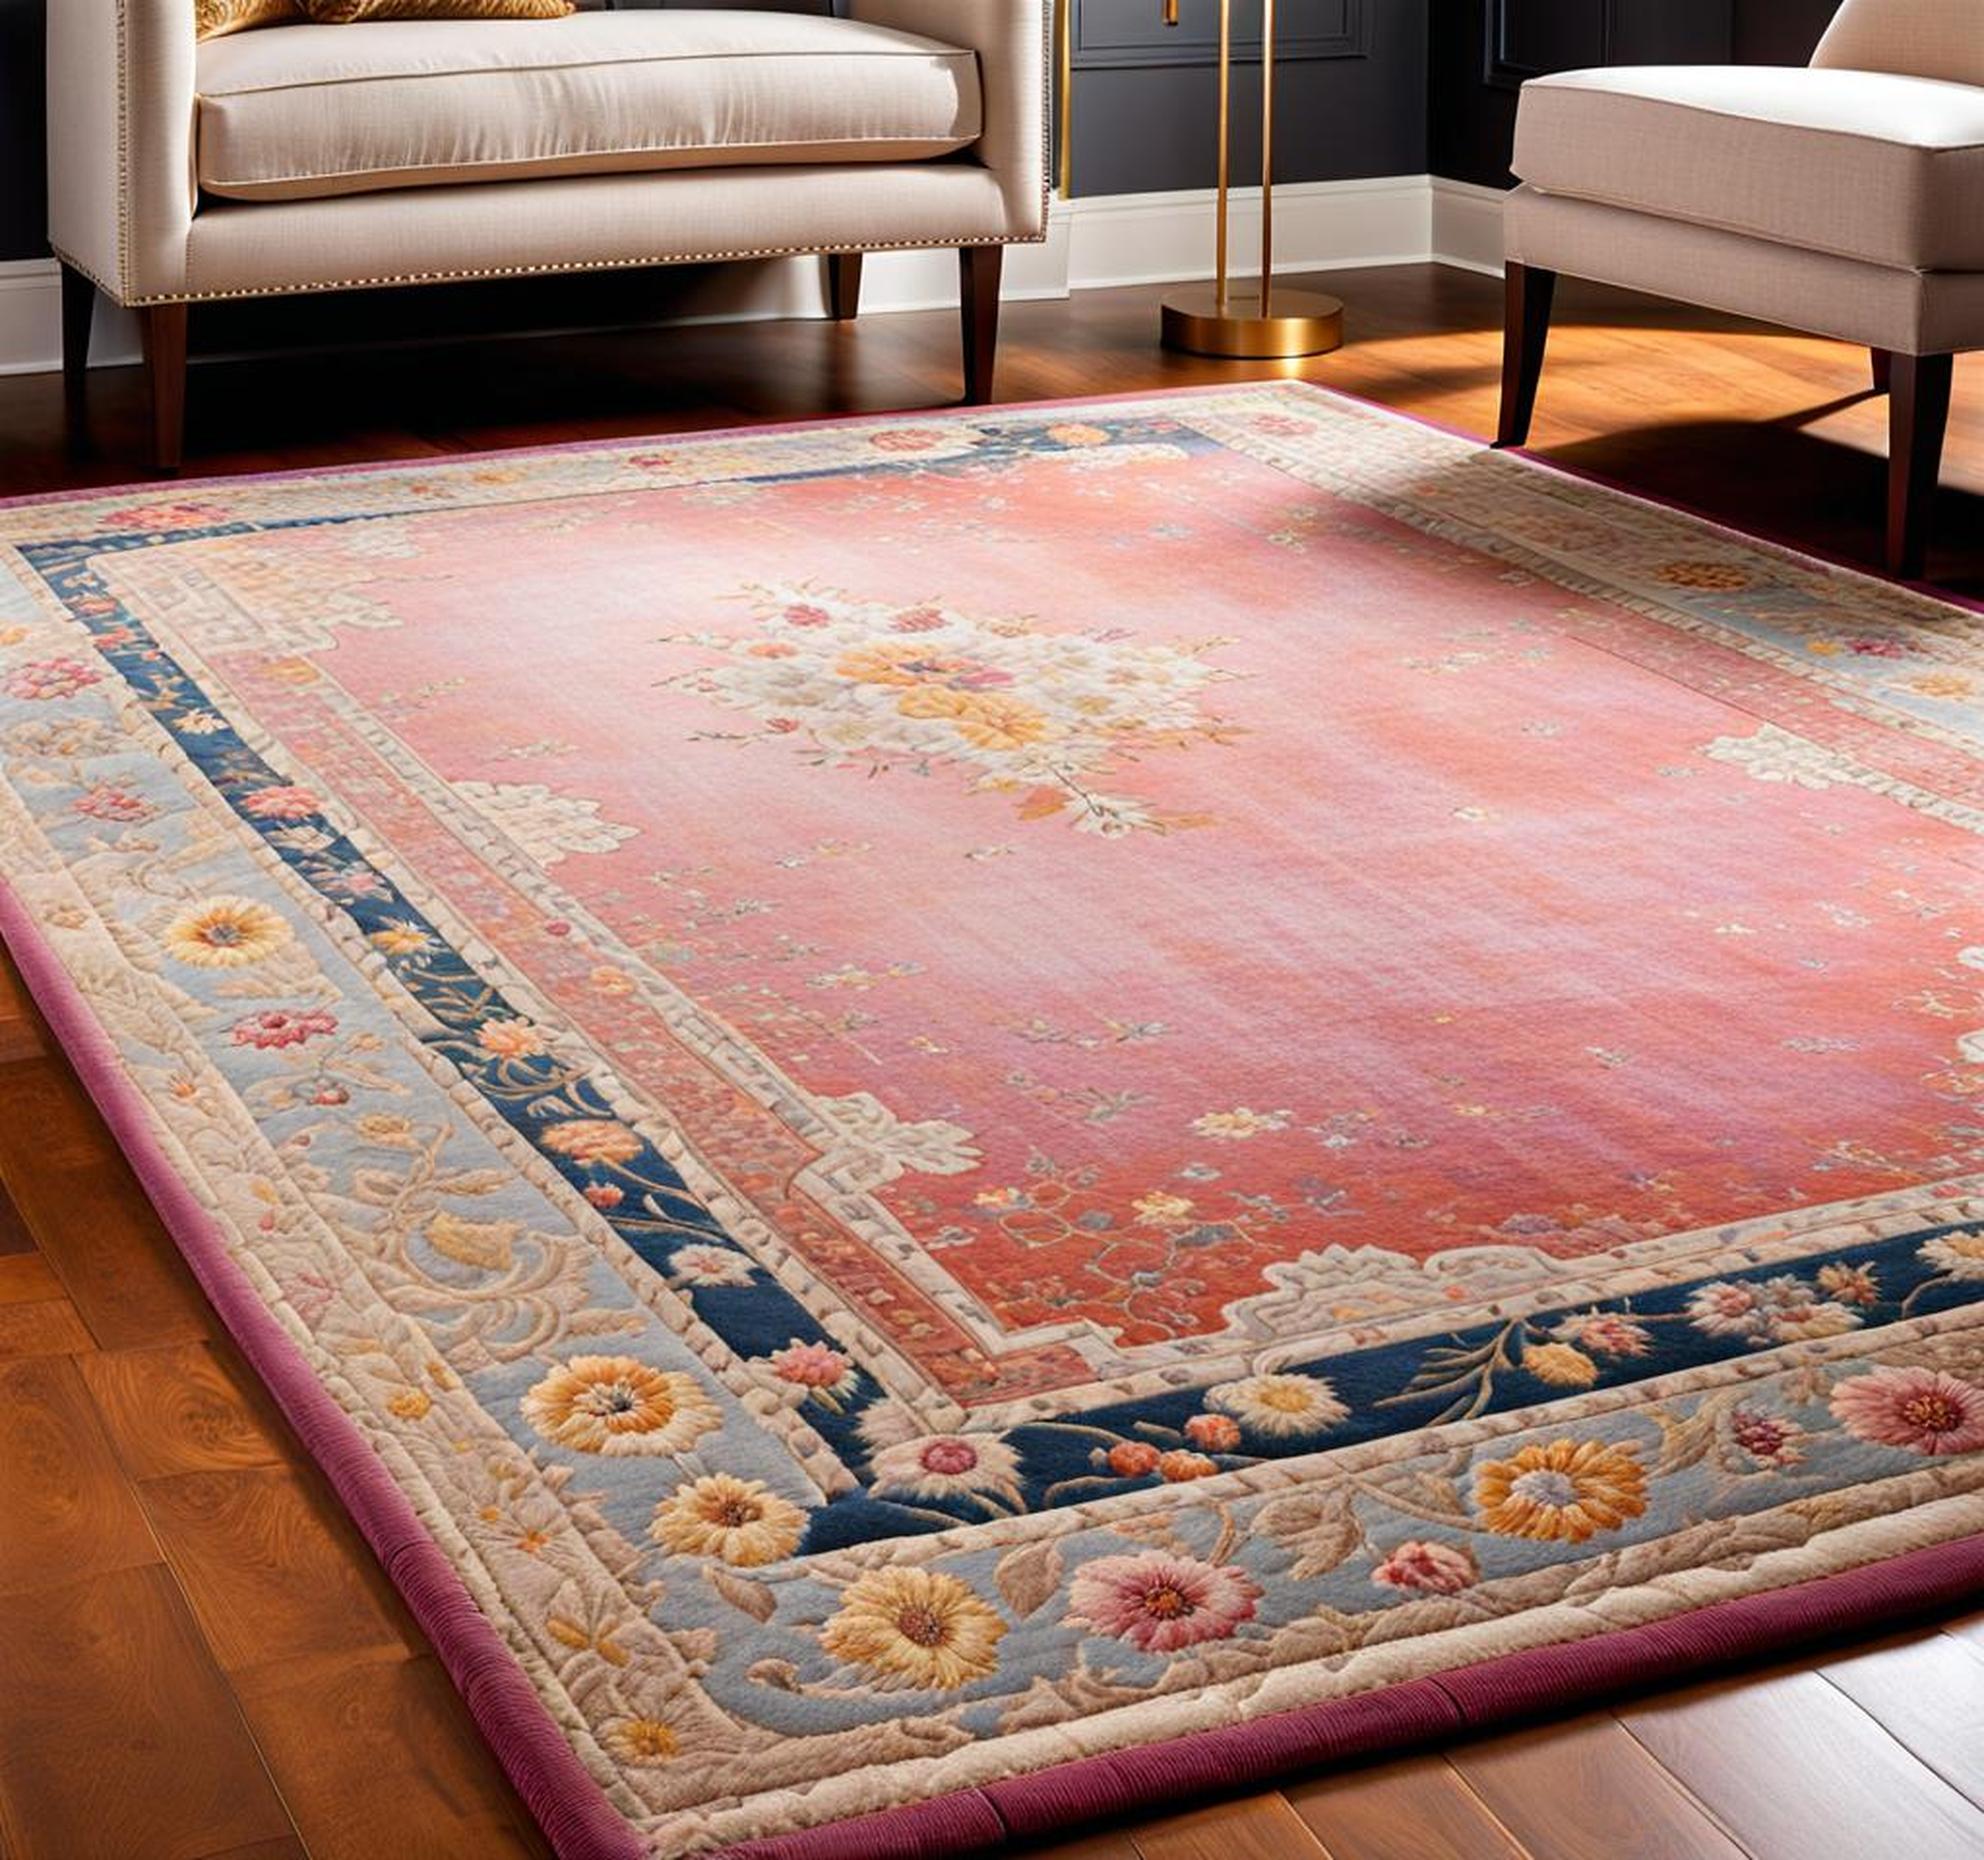 The Complete Guide to Shades of Light Rugs and Style